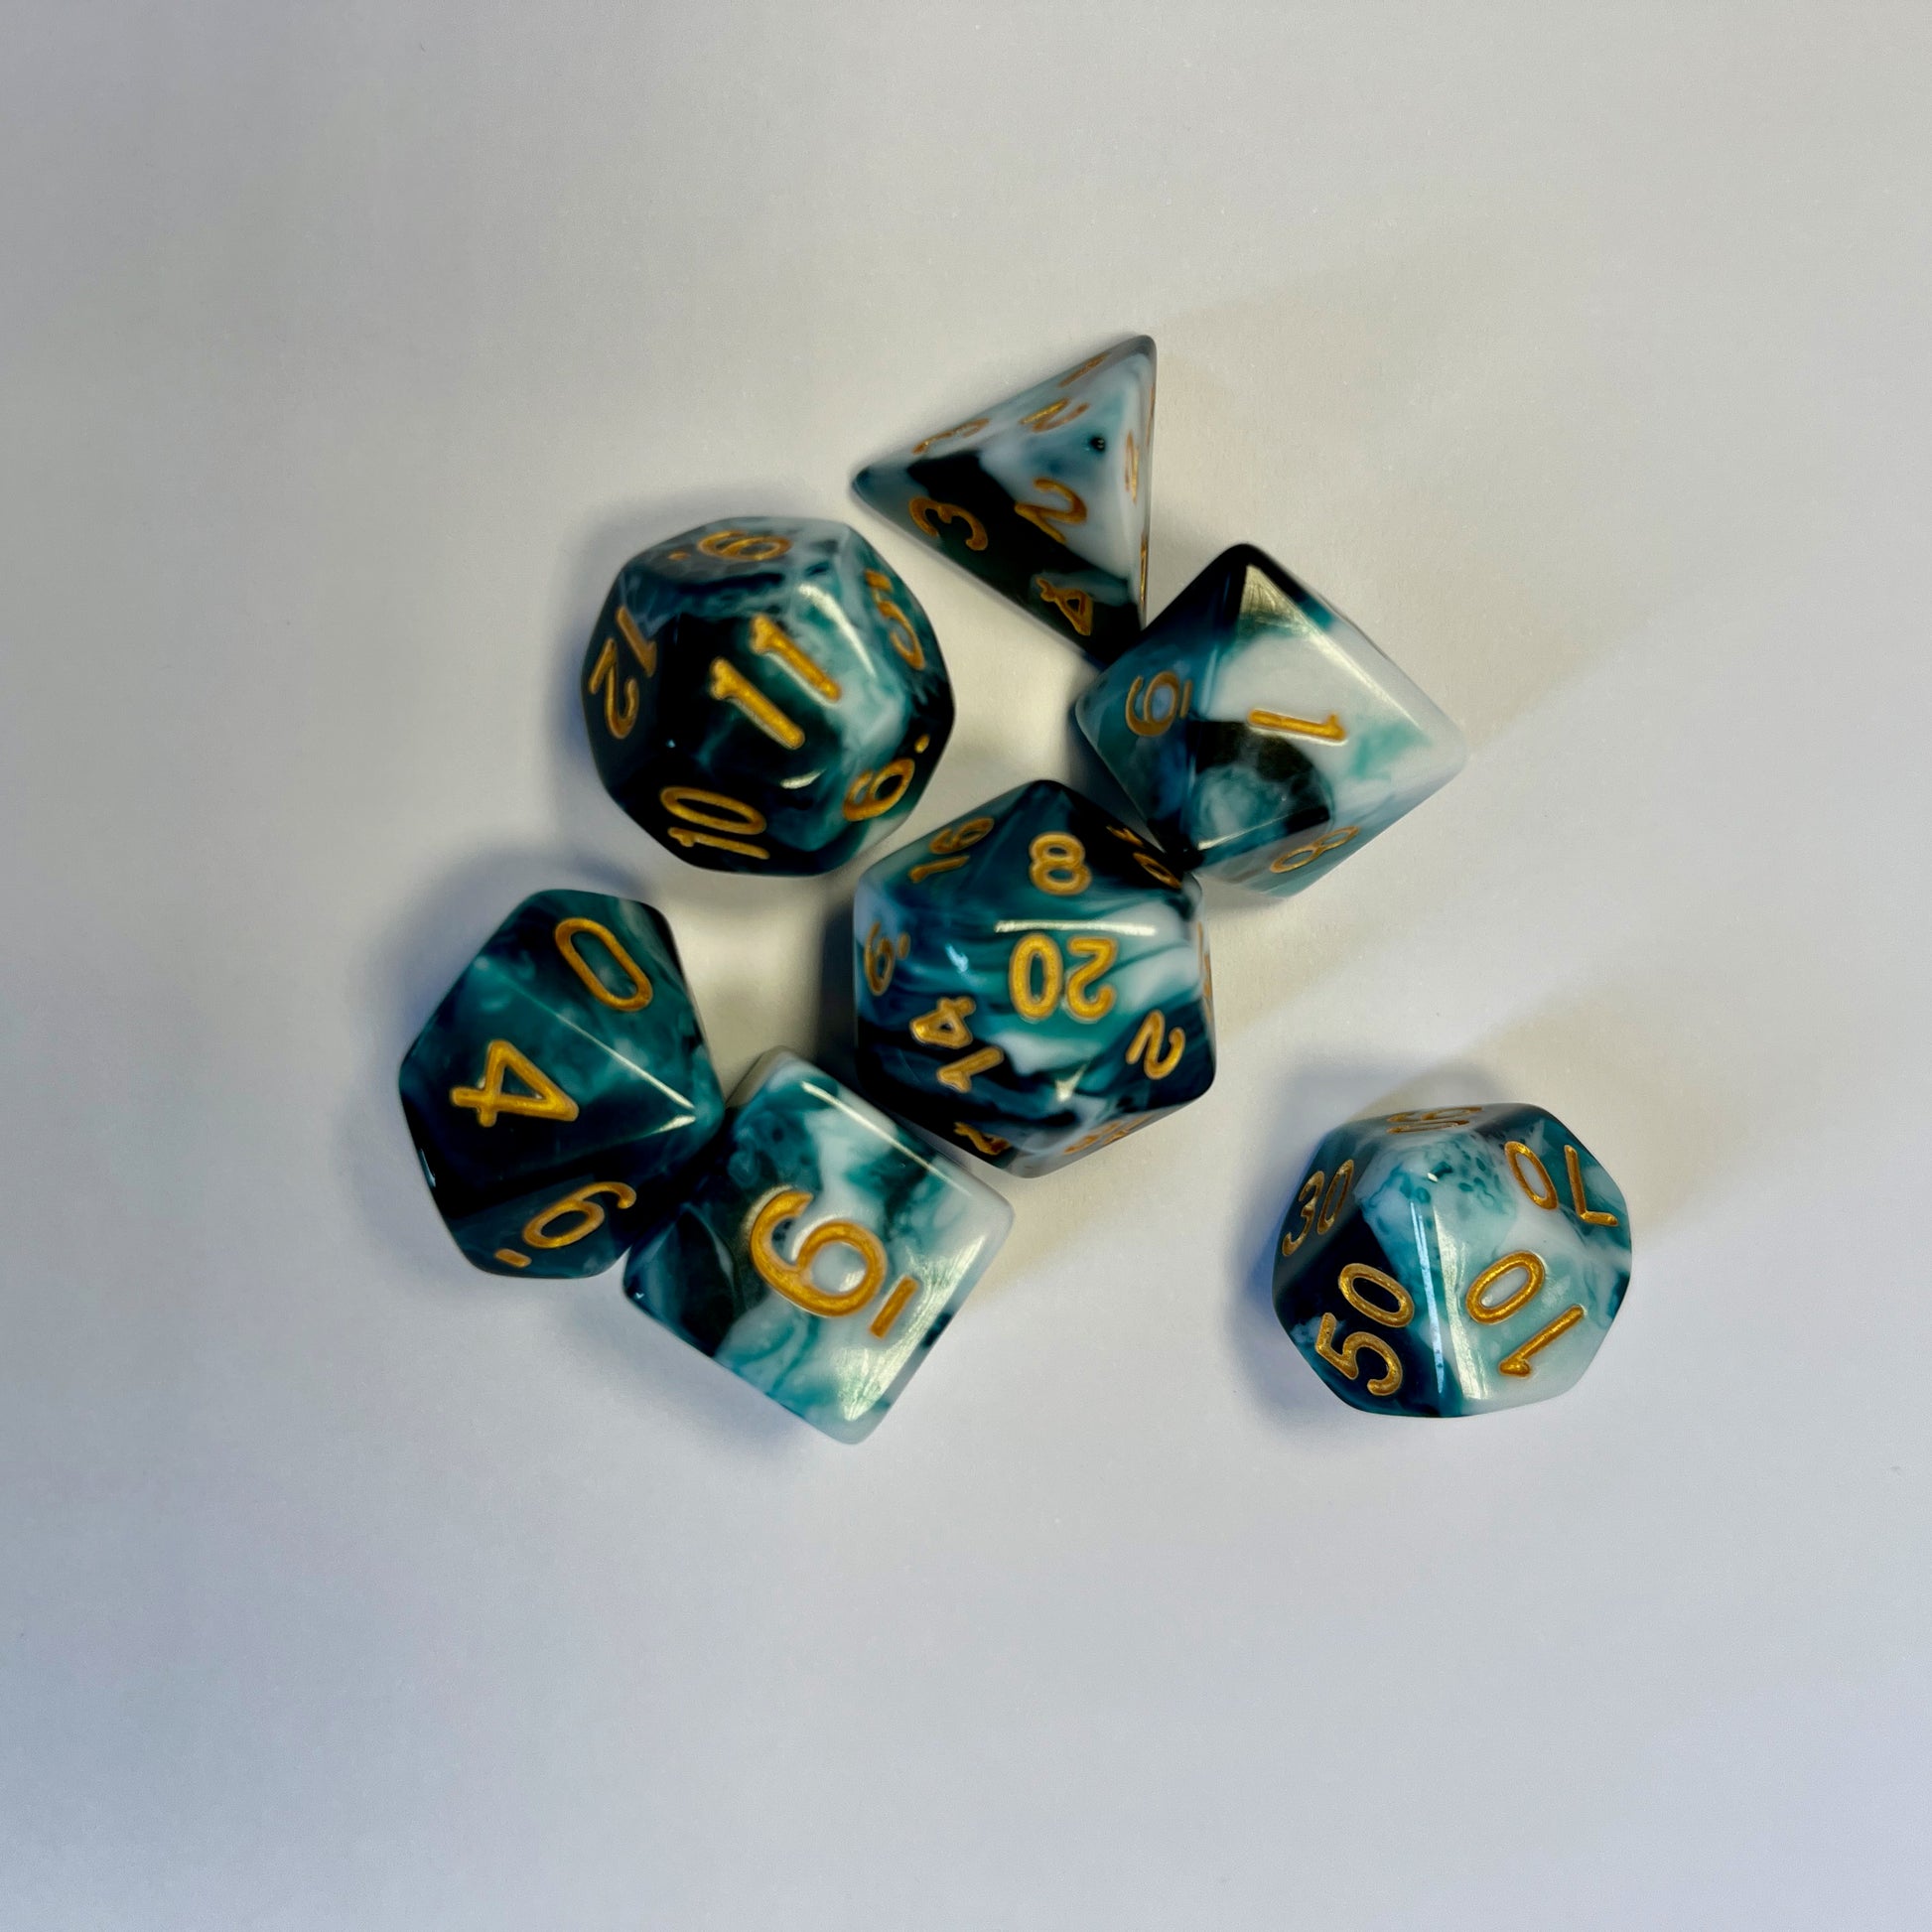 Tempest dnd dice set, teal dice set, DND, dungeons and dragons, role playing games, dice goblin and critical critters